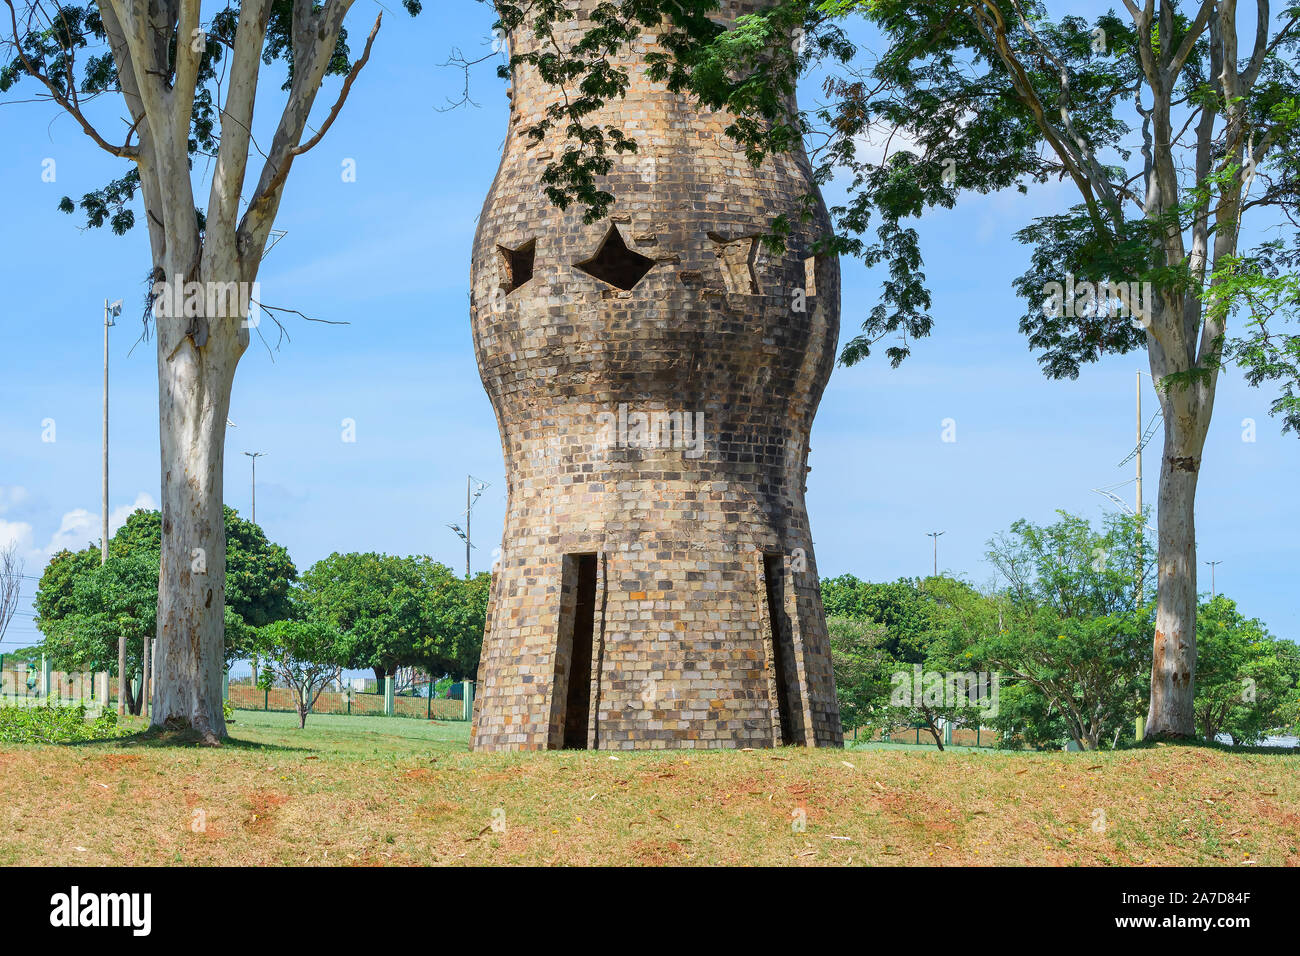 Campo Grande - MS, Brazil - October 30, 2019: Zarabatana Indigenous Monument at Park of the Nations Indigenous. Tourist place. Stock Photo